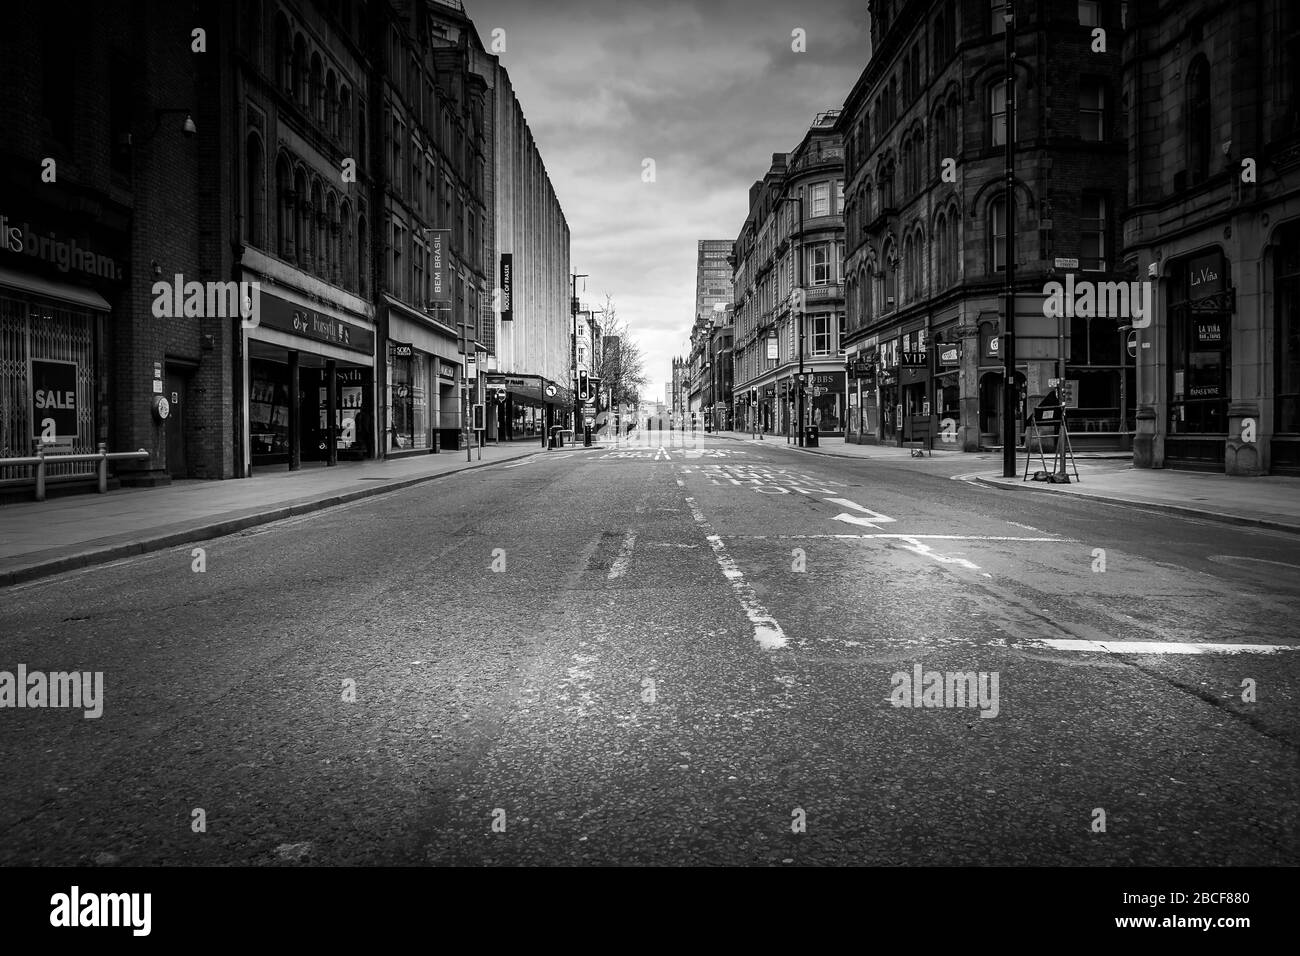 Deansgate, Manchester, United Kingdom. Empty streets, closed business's during the coronavirus outbreak, April 2020. Stock Photo